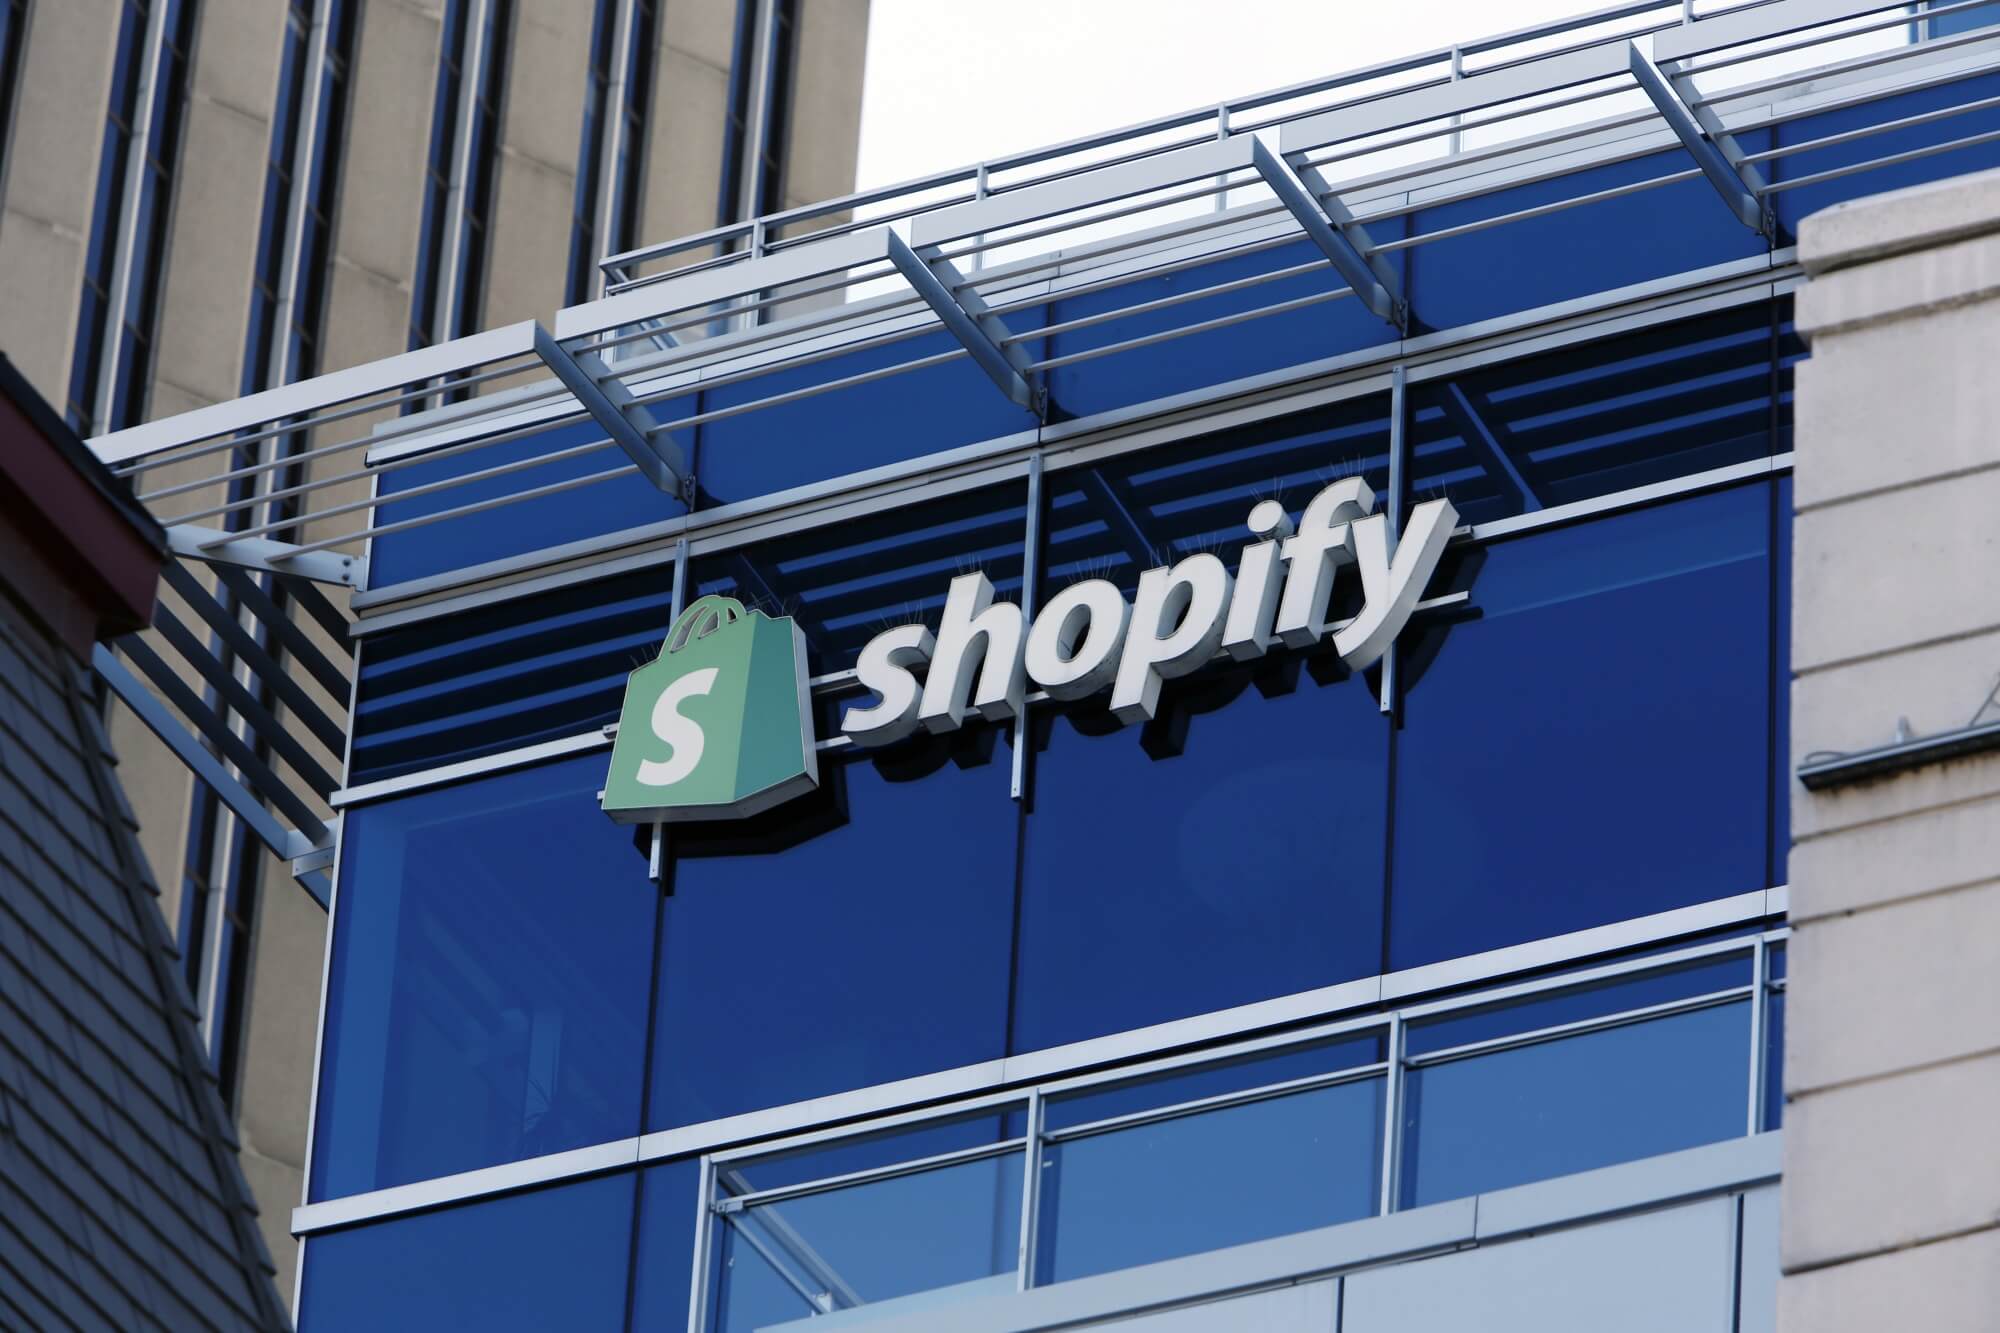 Shopify sign on a building